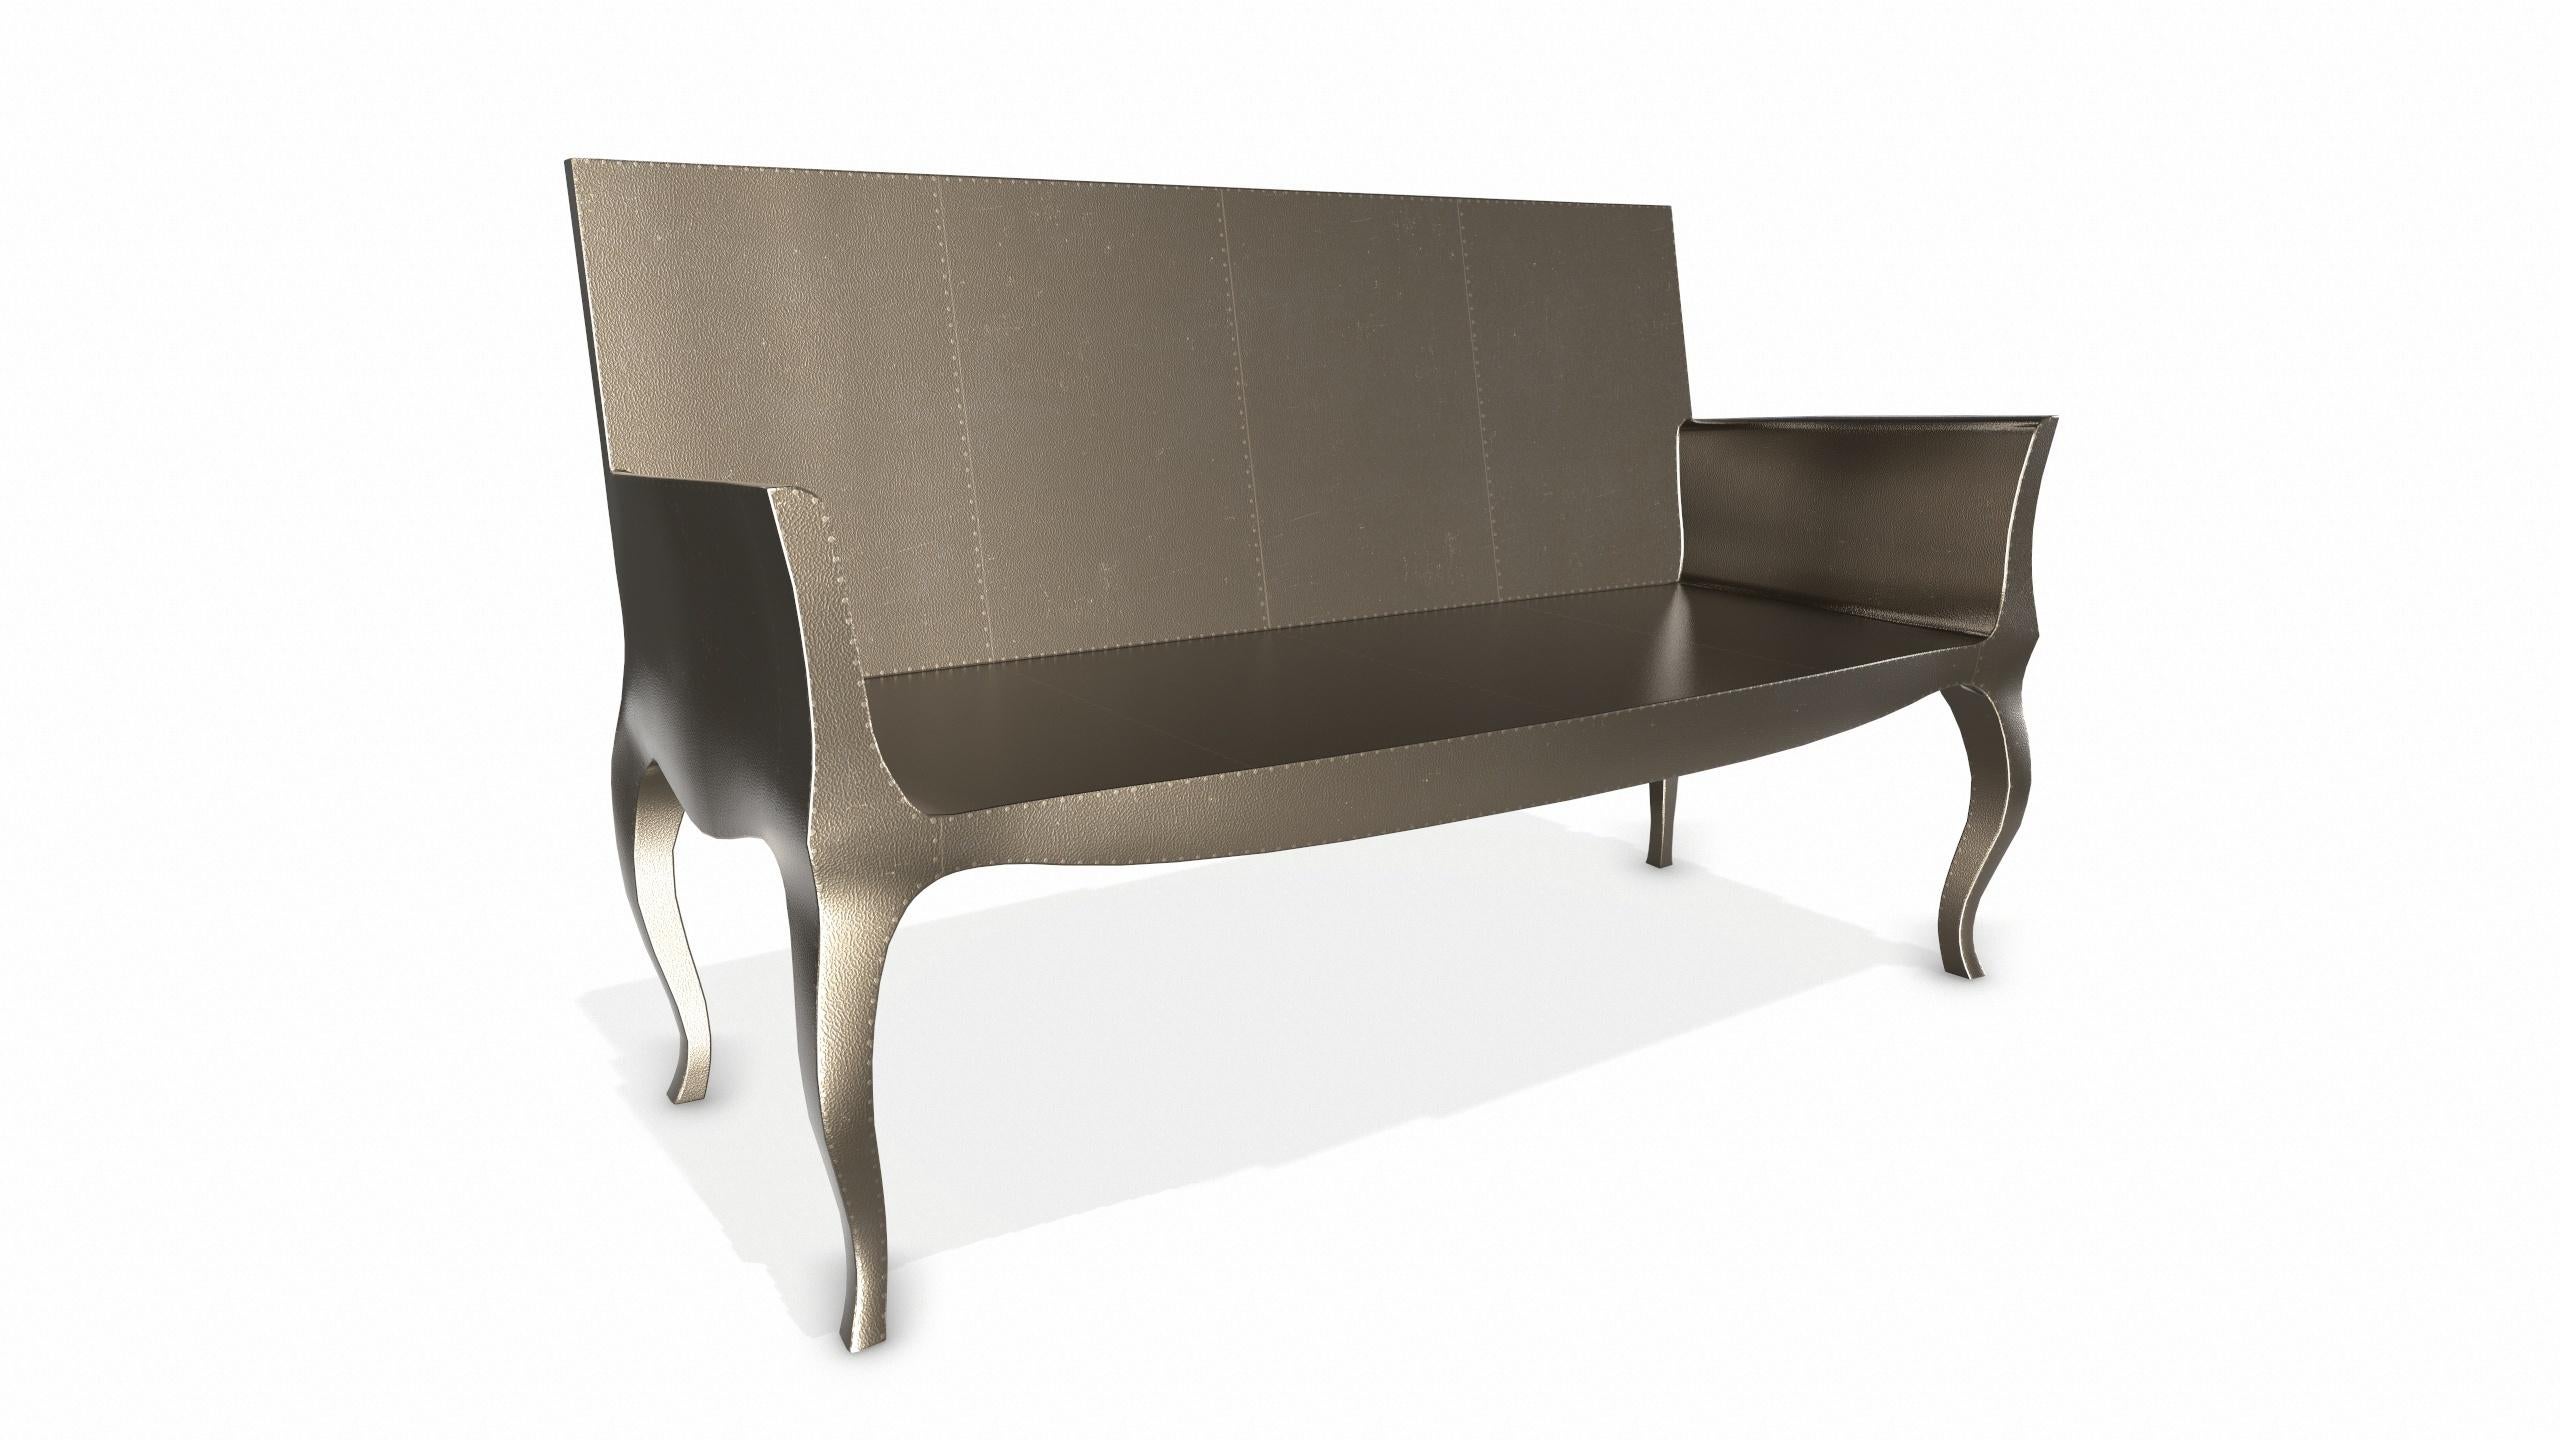 Contemporary Louise Settee Art Deco Benches in Fine Hammered Antique Bronze by Paul Mathieu For Sale